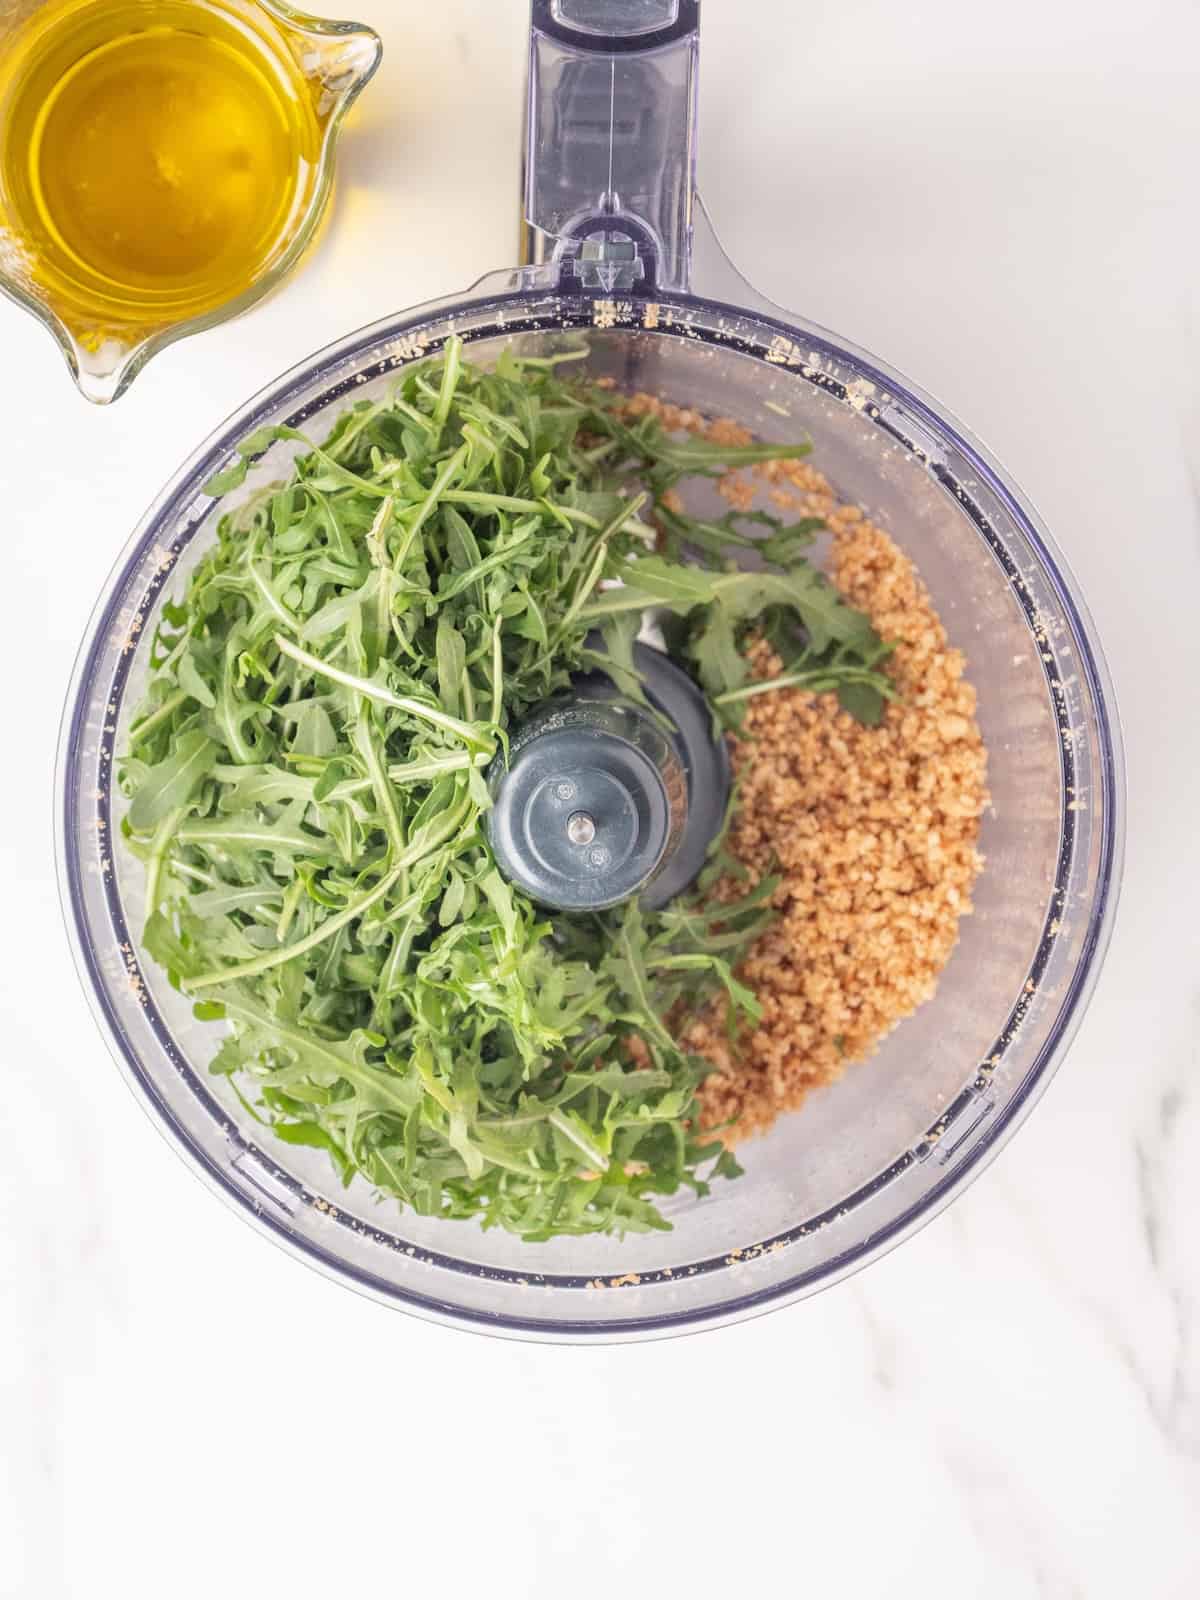 An overhead shot of a food processor with toasted pine nuts and garlic blended and fresh arugula added, along with a measuring cup with a spout containing olive oil.